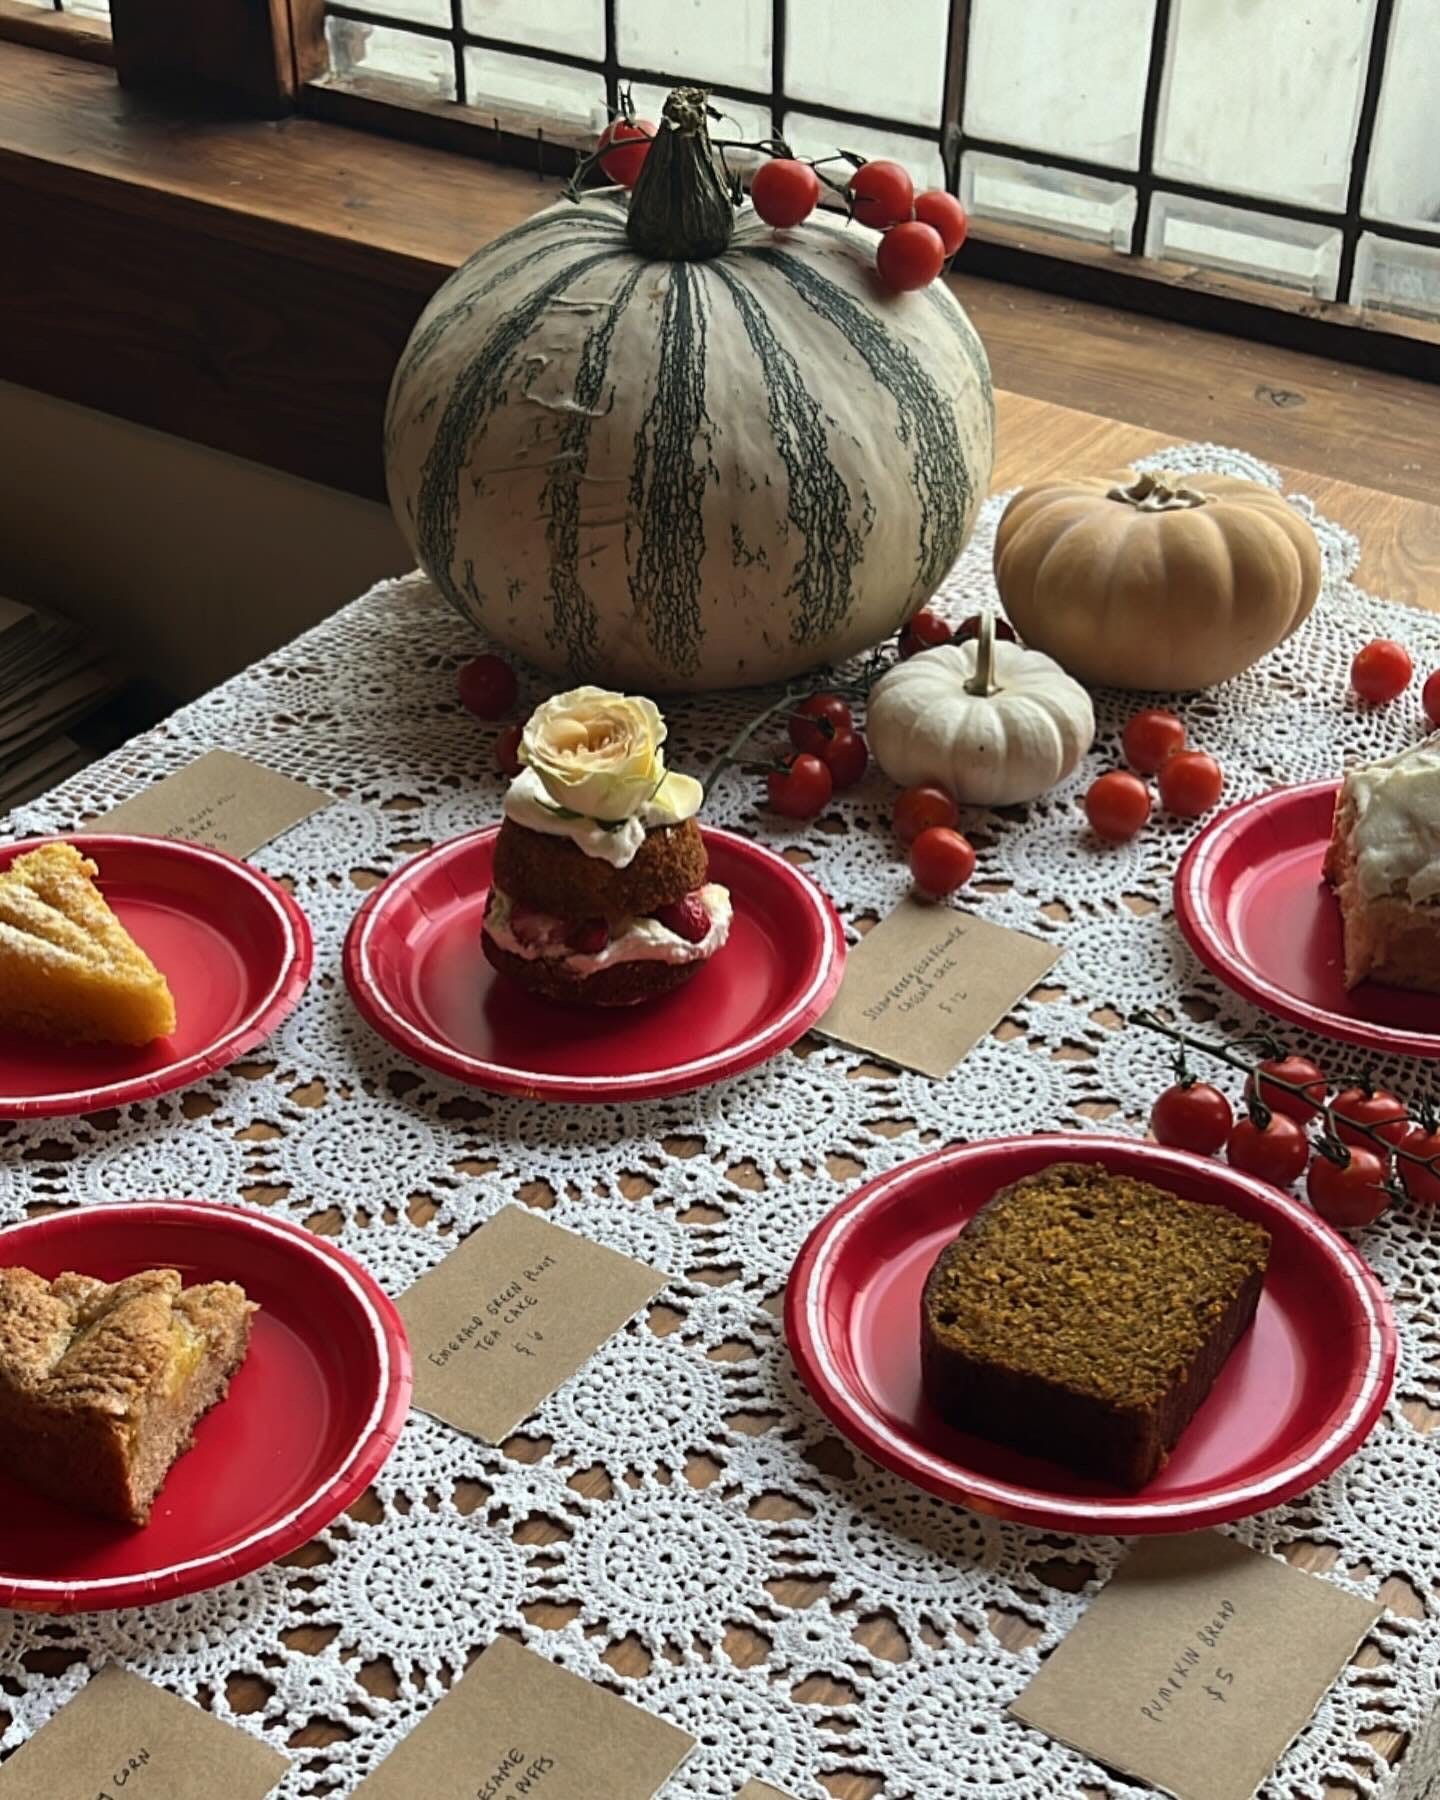 Image of a variety of pastries spread out on a lace doily tablecloth. Decor of pumpkins and cherry tomatoes strewn throughout.